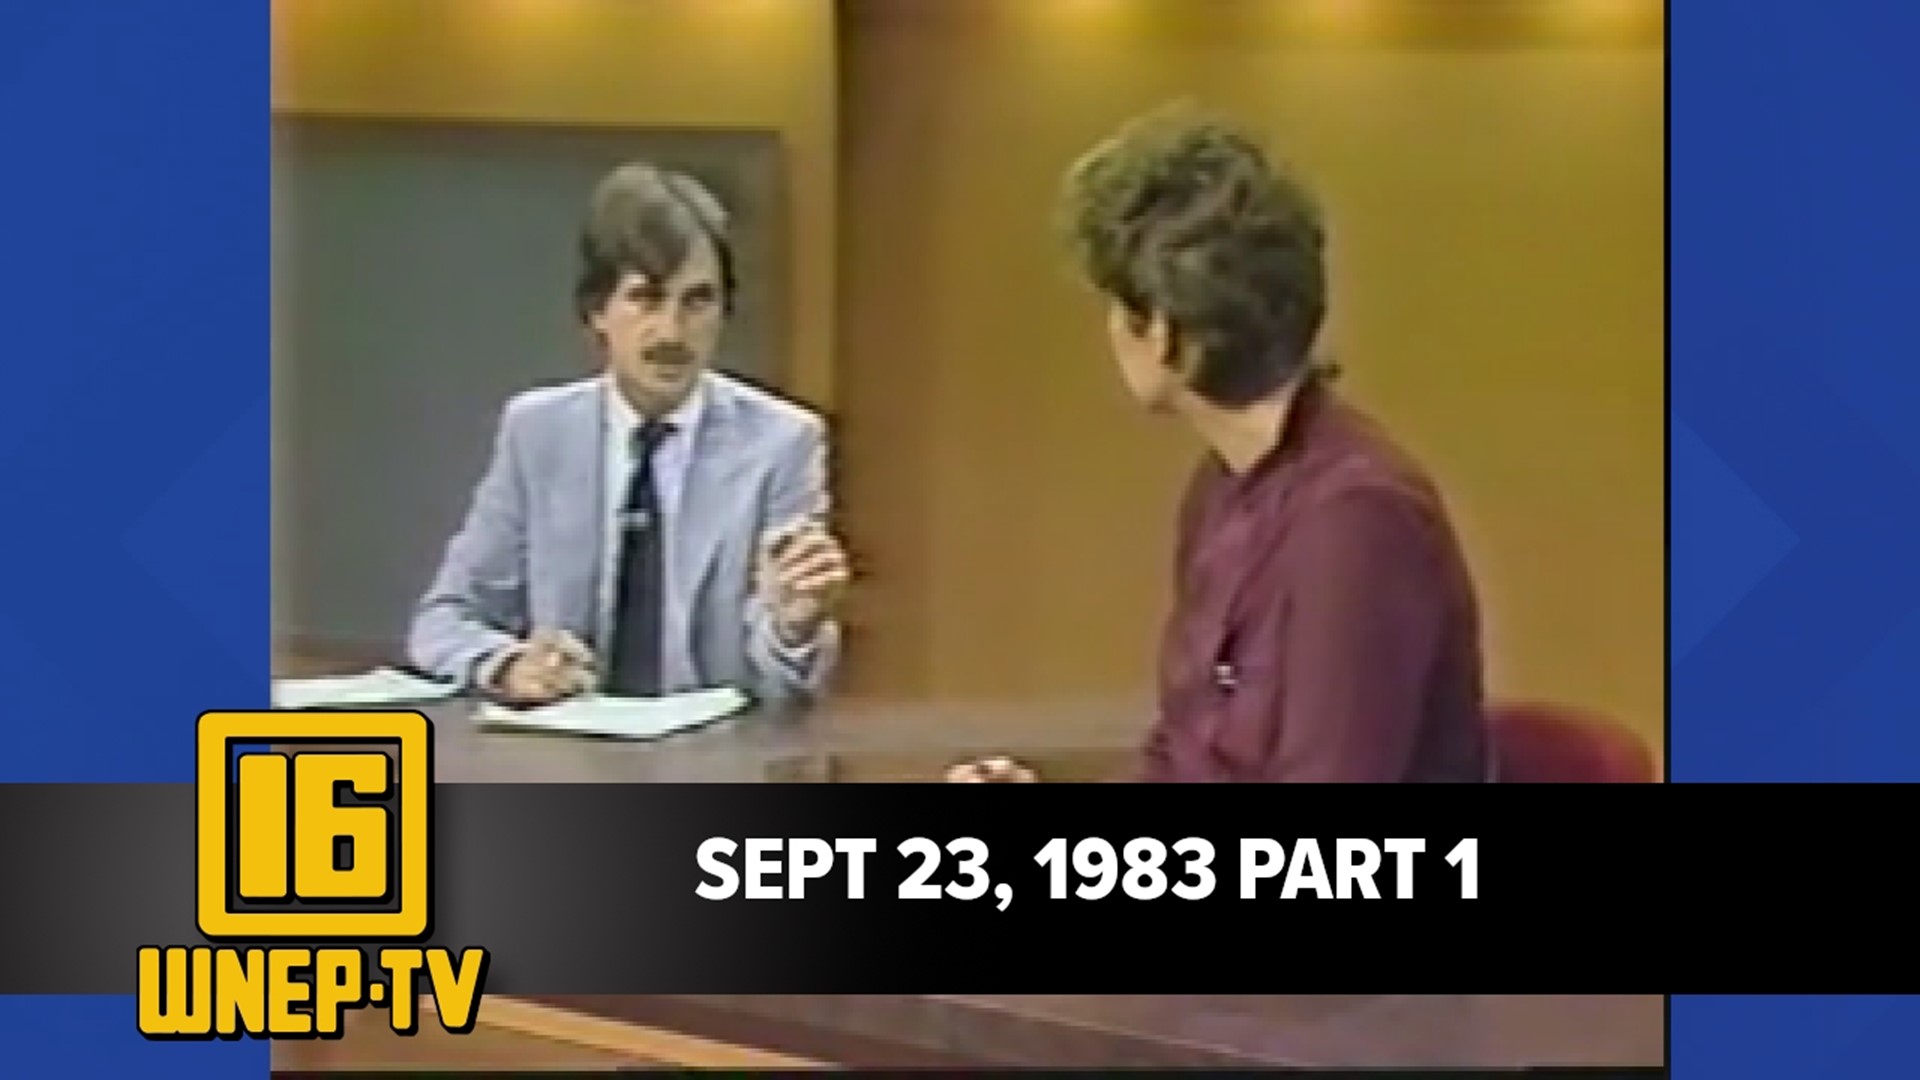 Join Karen Harch with curated stories from September 23, 1983.